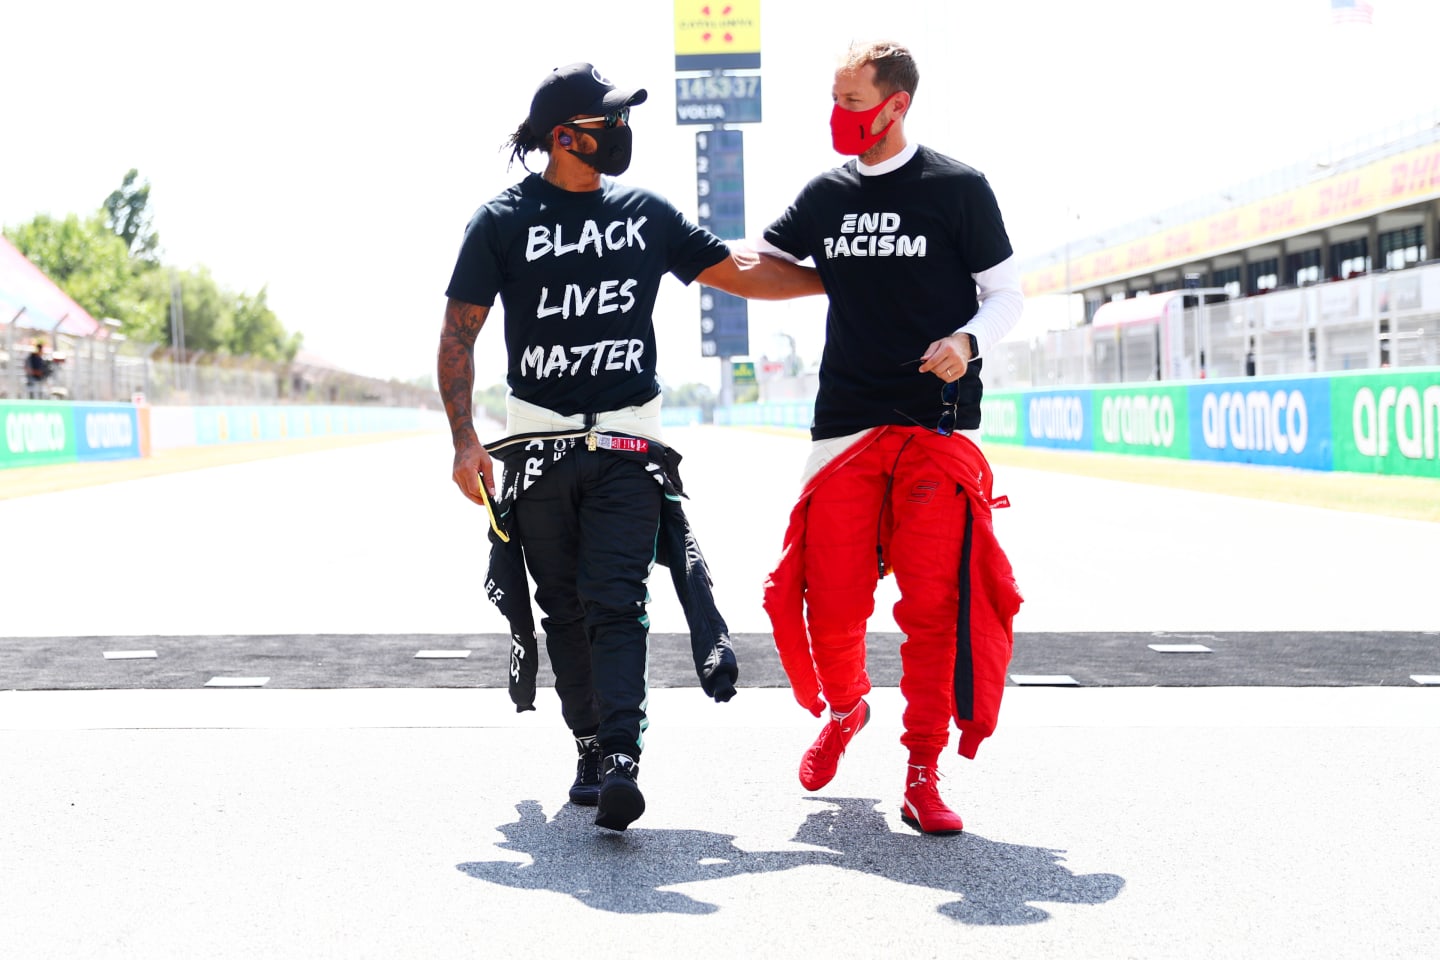 BARCELONA, SPAIN - AUGUST 16: Lewis Hamilton of Great Britain and Mercedes GP and Sebastian Vettel of Germany and Ferrari talk on the grid before the F1 Grand Prix of Spain at Circuit de Barcelona-Catalunya on August 16, 2020 in Barcelona, Spain. (Photo by Dan Istitene - Formula 1/Formula 1 via Getty Images)